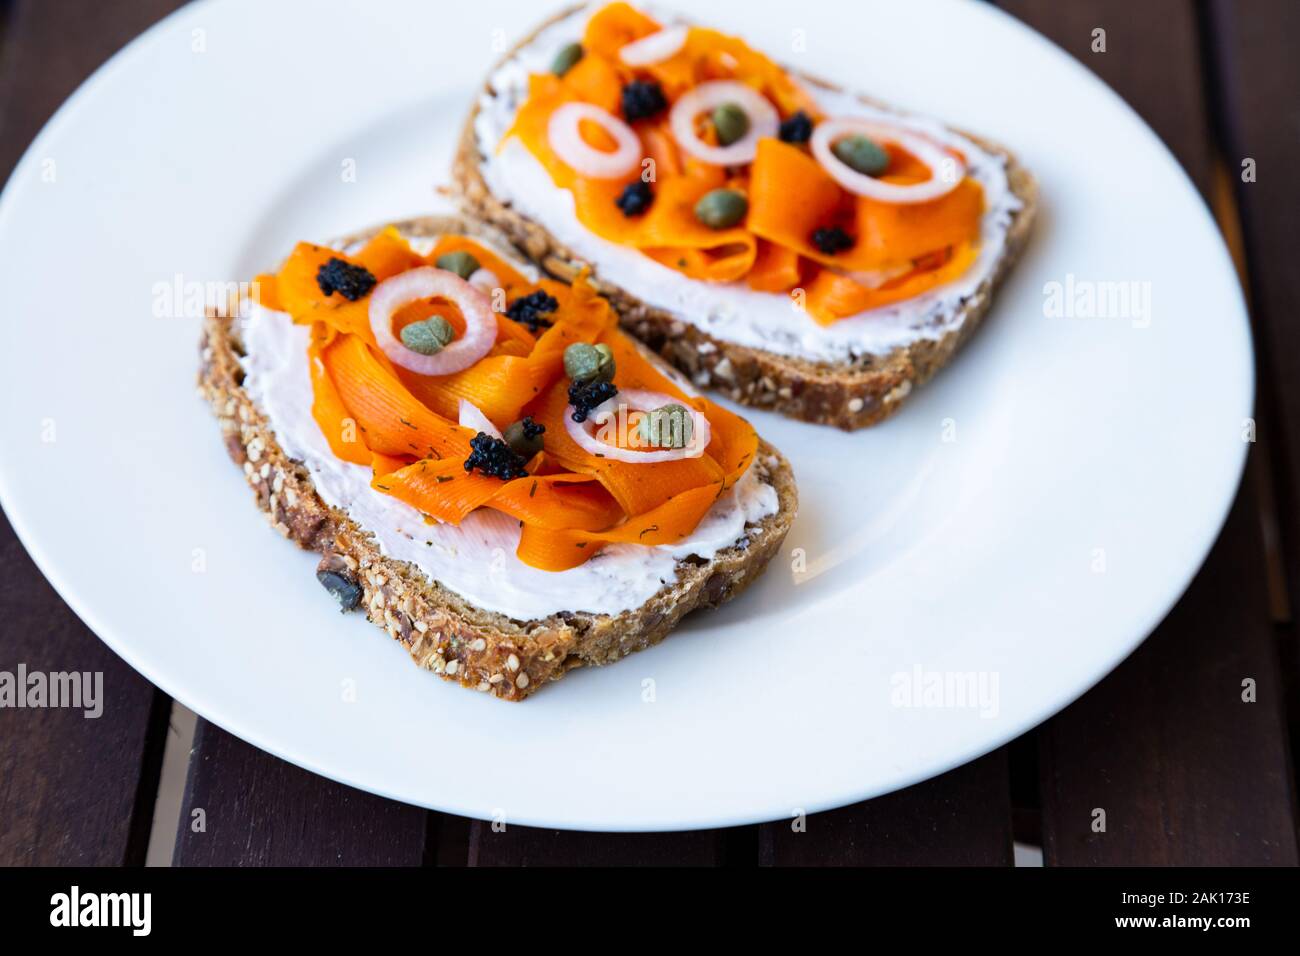 Vegan carrot lox - Vegan Smoked Salmon based on carrots which is served on a healthy sourdough bread topped with onions, capers and vegan algae caviar Stock Photo